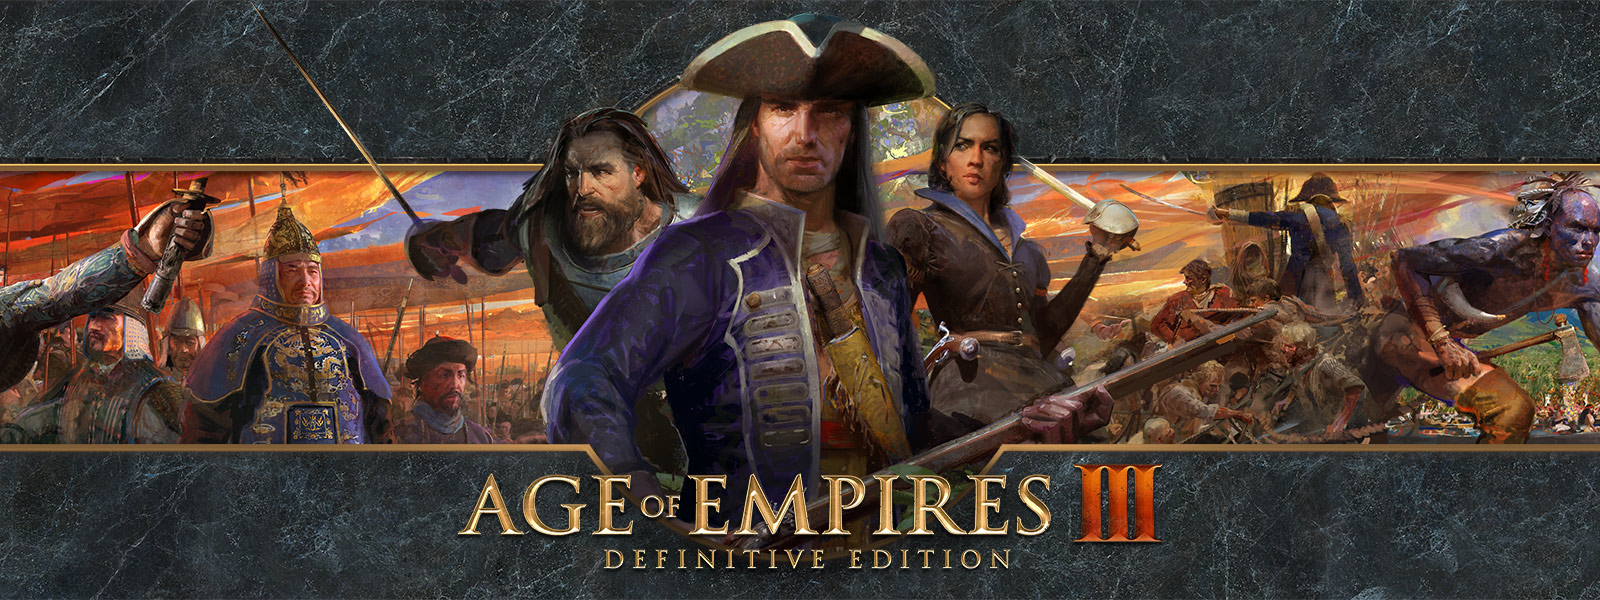 Age of Empires III: Definitive Edition logo on a background featuring war leaders and their armies